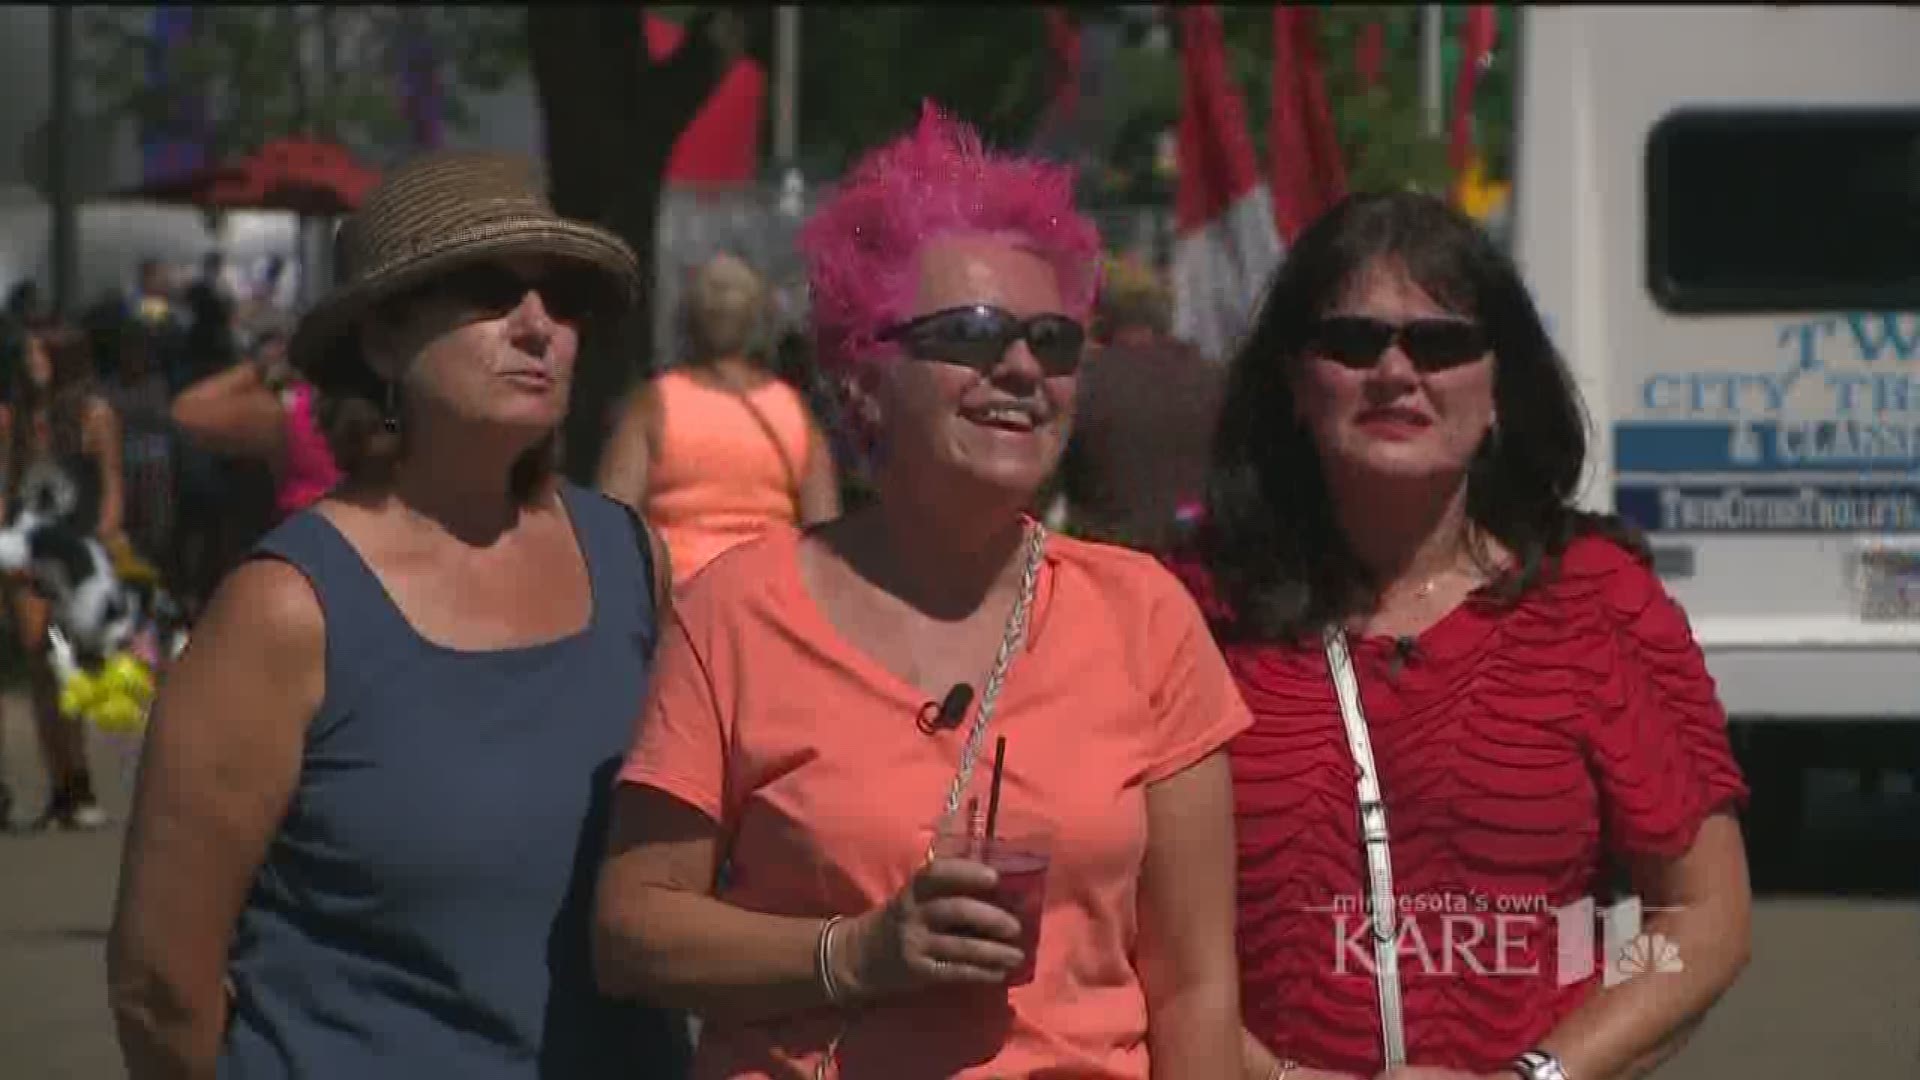 The Great Minnesota Get-Together gets ready to kick off this Thursday. So we thought it would be a great time to look back to 2013, when KARE 11's Boyd Huppert dared to compare the Minnesota State Fair to the Iowa State Fair. http://kare11.tv/2ii5DvM